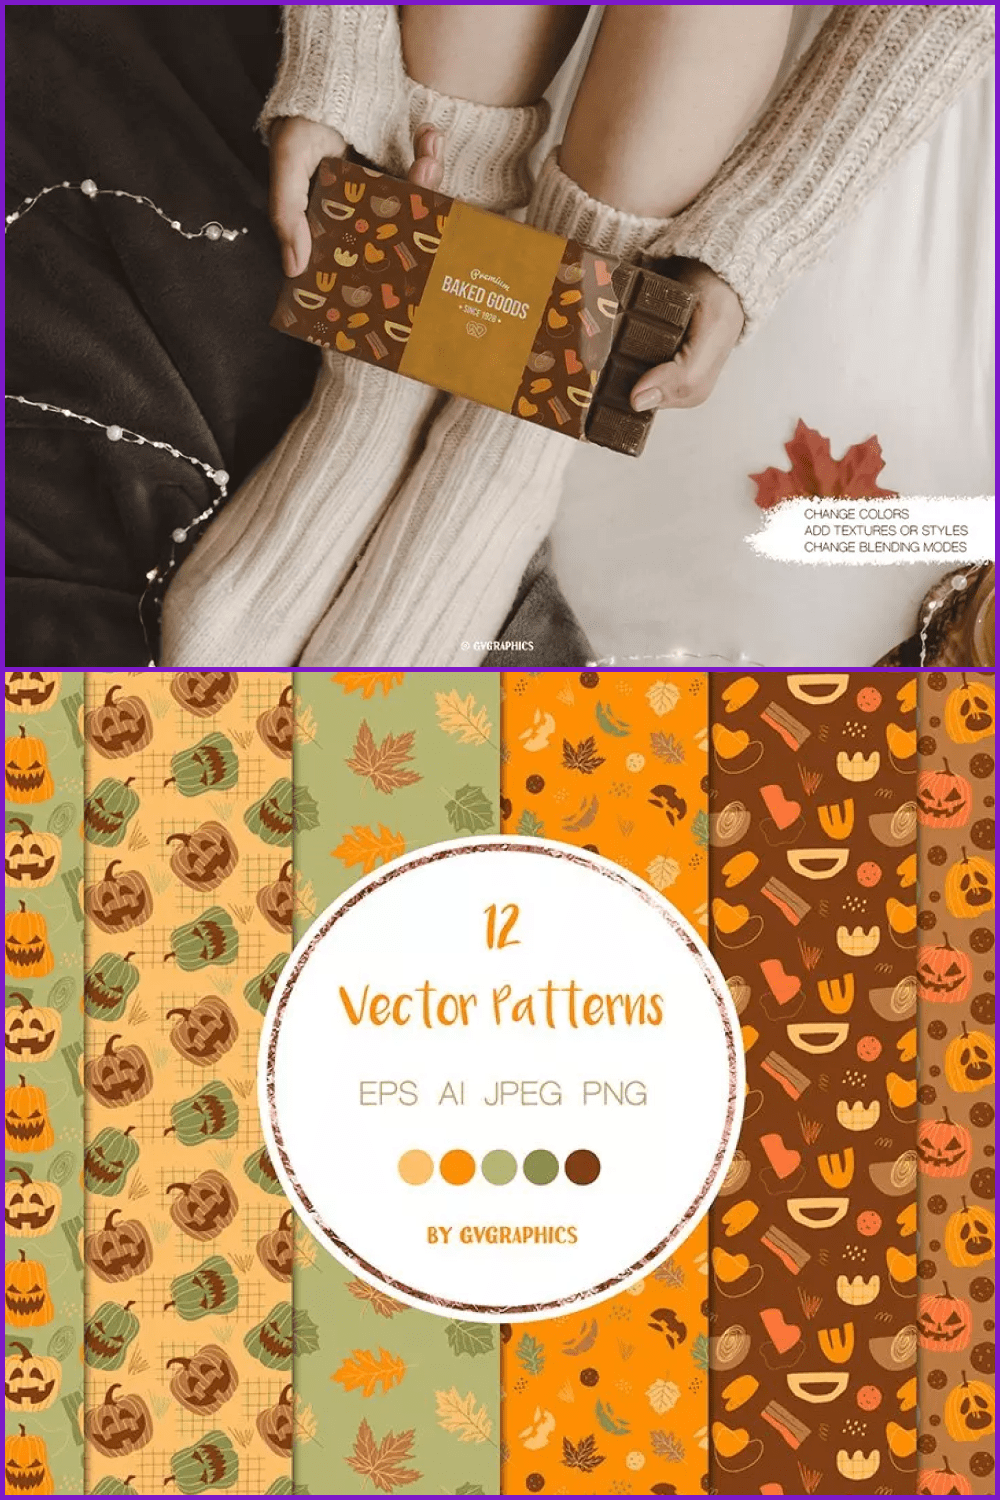 Mix of Halloween Pumpkins and Fall Leaves patterns.